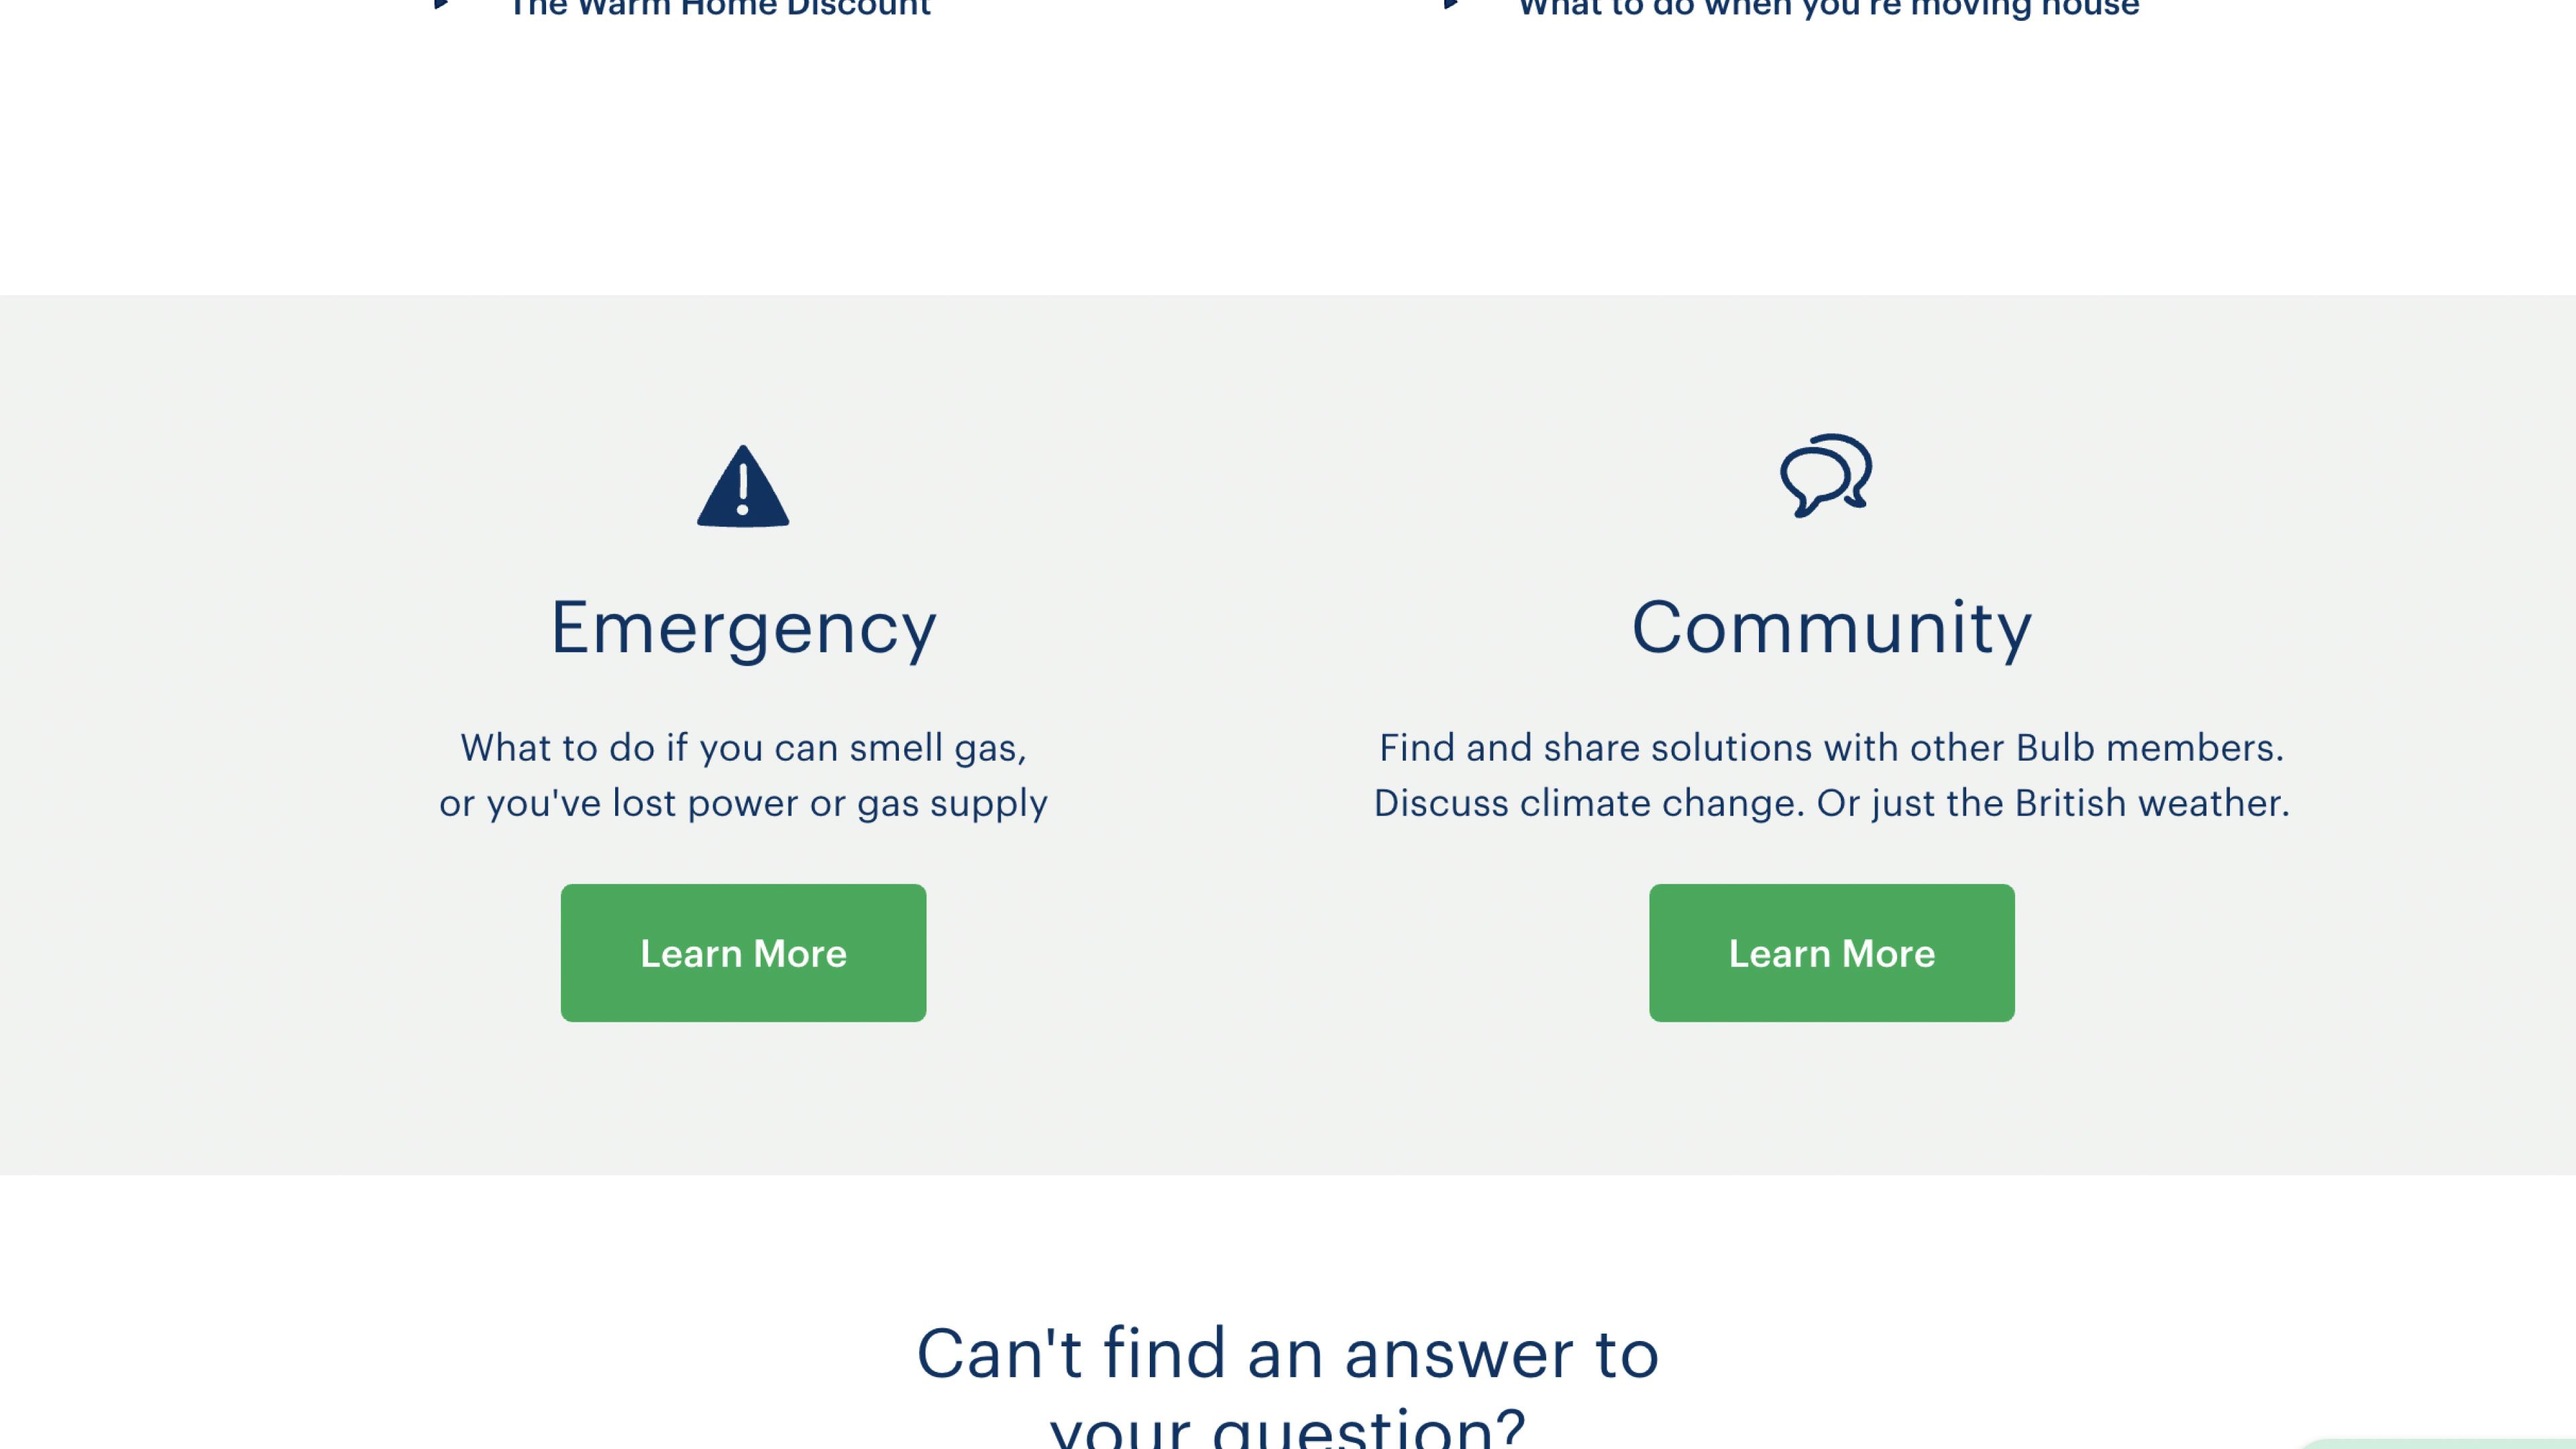 A screenshot from Bulb’s website. It shows an exclamation mark in a triangle next to a paragraph titled "Emergency" and a speech bubble next to a paragraph titled "Community"